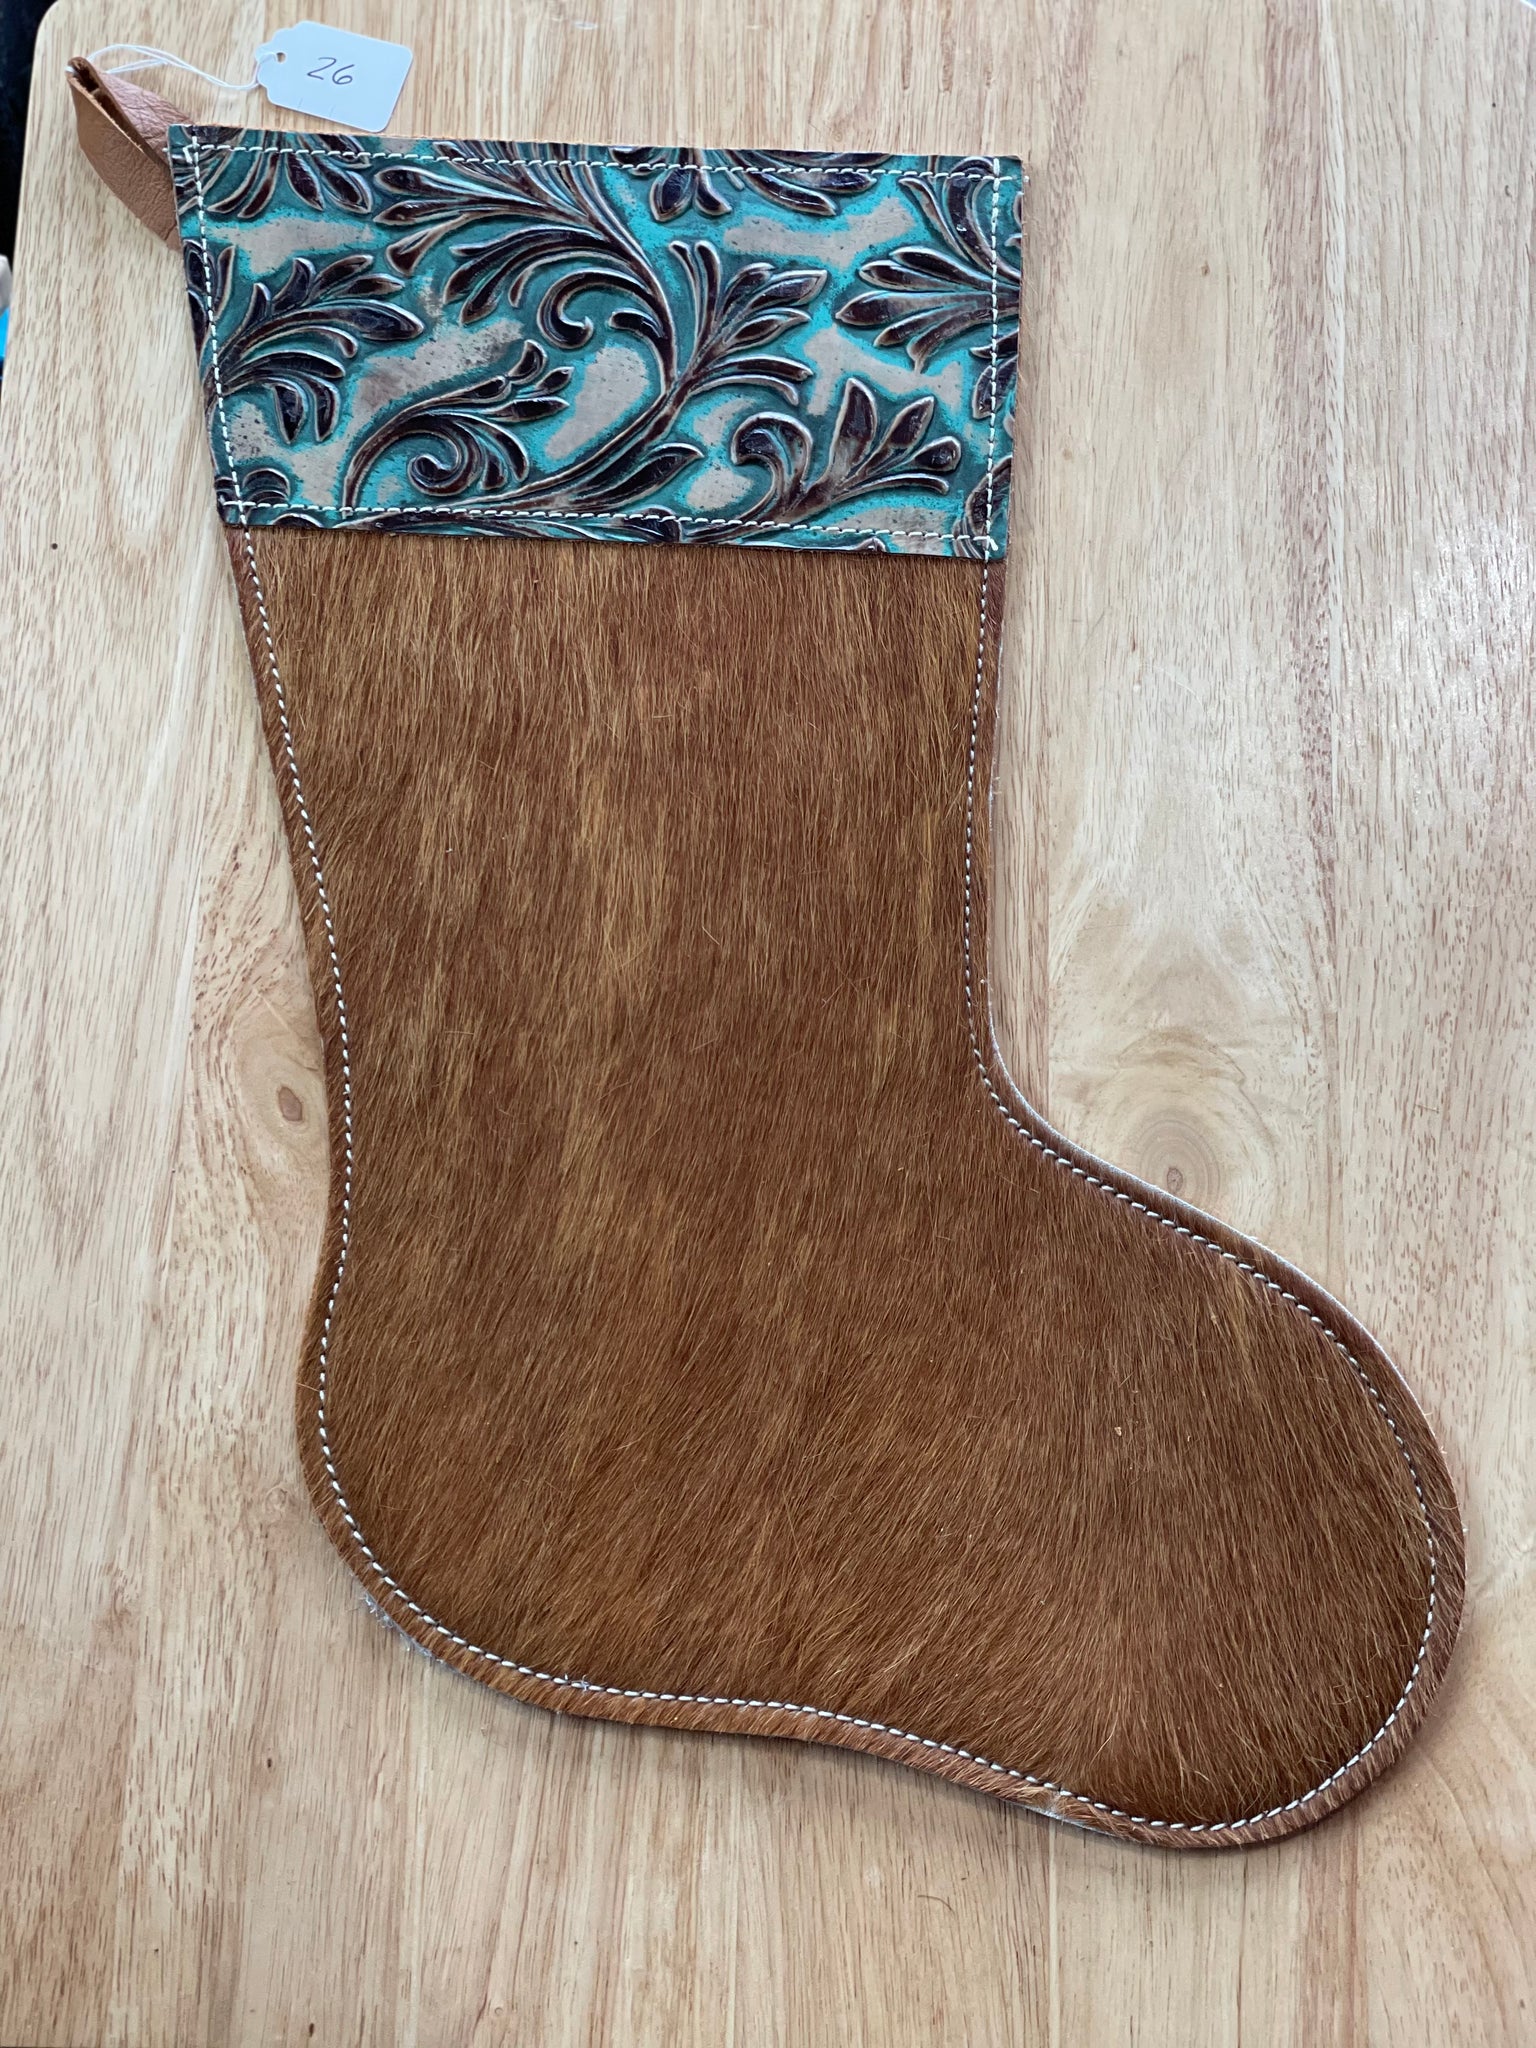 Cowhide and Leather Christmas Stocking #26